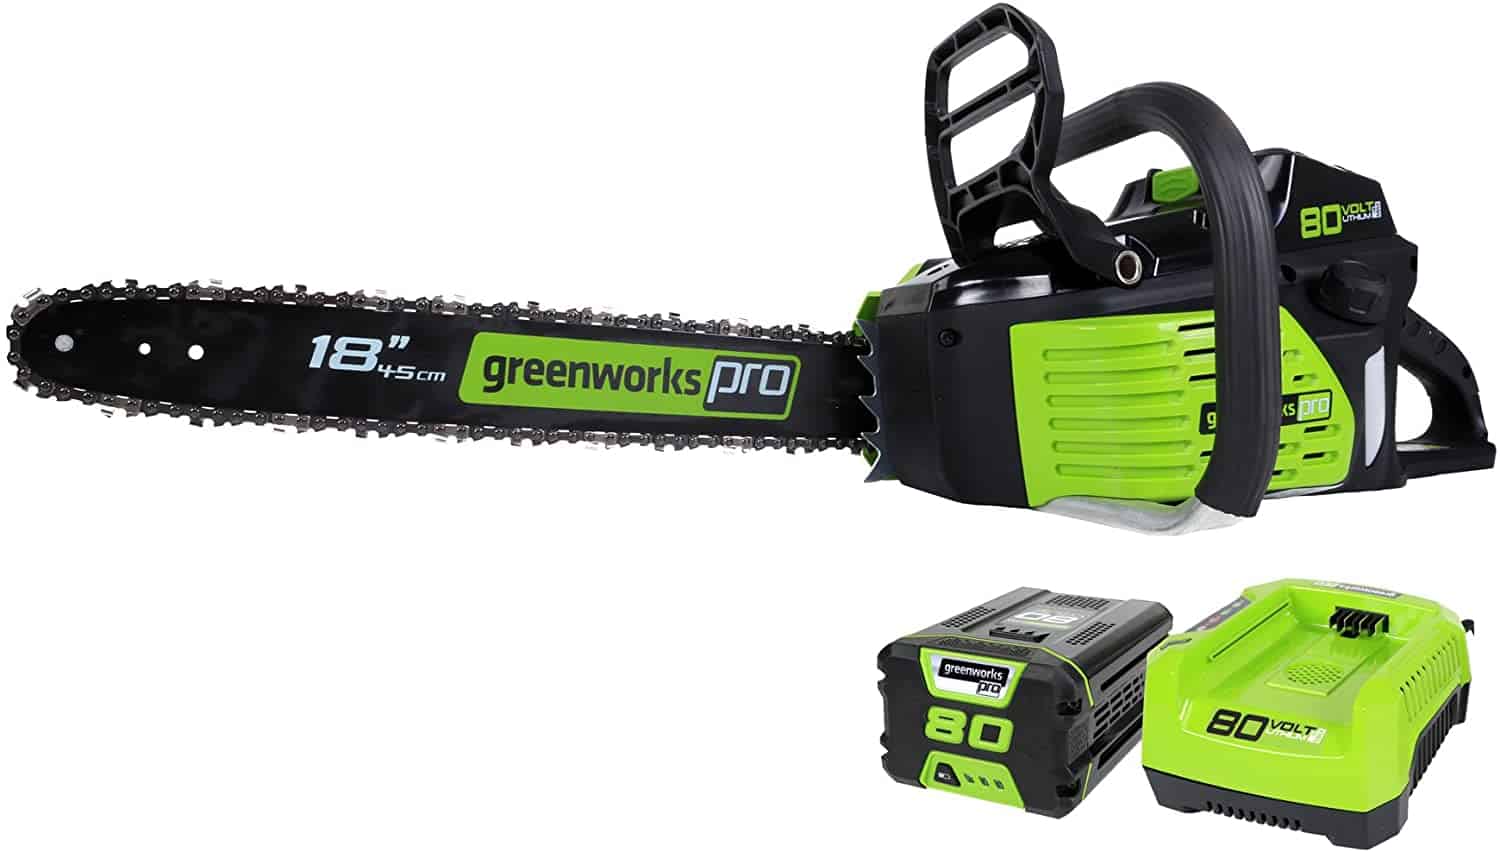 The Greenworks Pro 18-inch is a best battery powered chainsaw